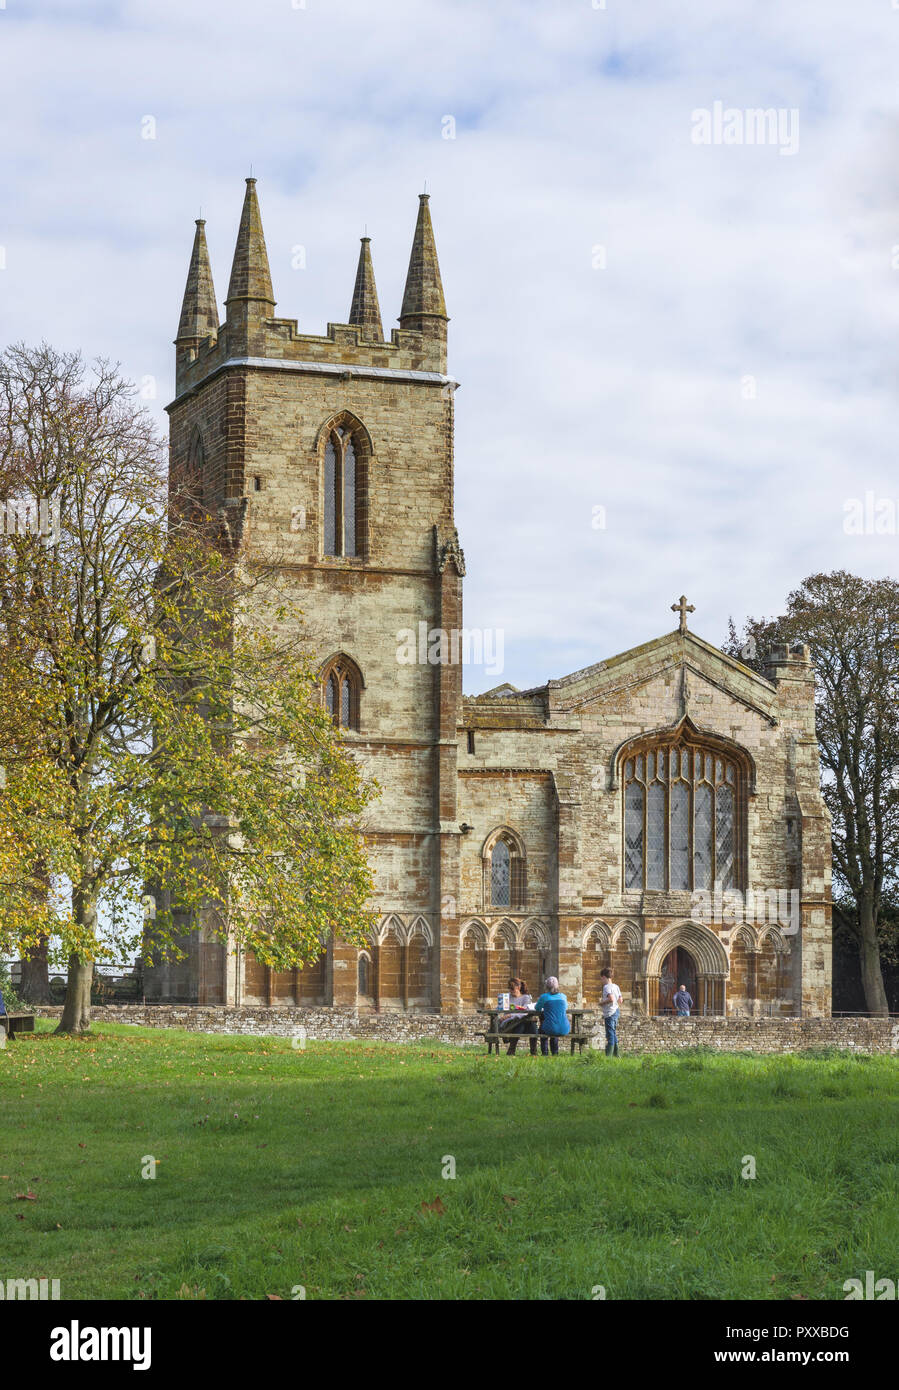 The church of St Mary in the village of Canons Ashby, Northamptonshire, UK; it incorporates fragments of a 12th century Augustine priory Stock Photo